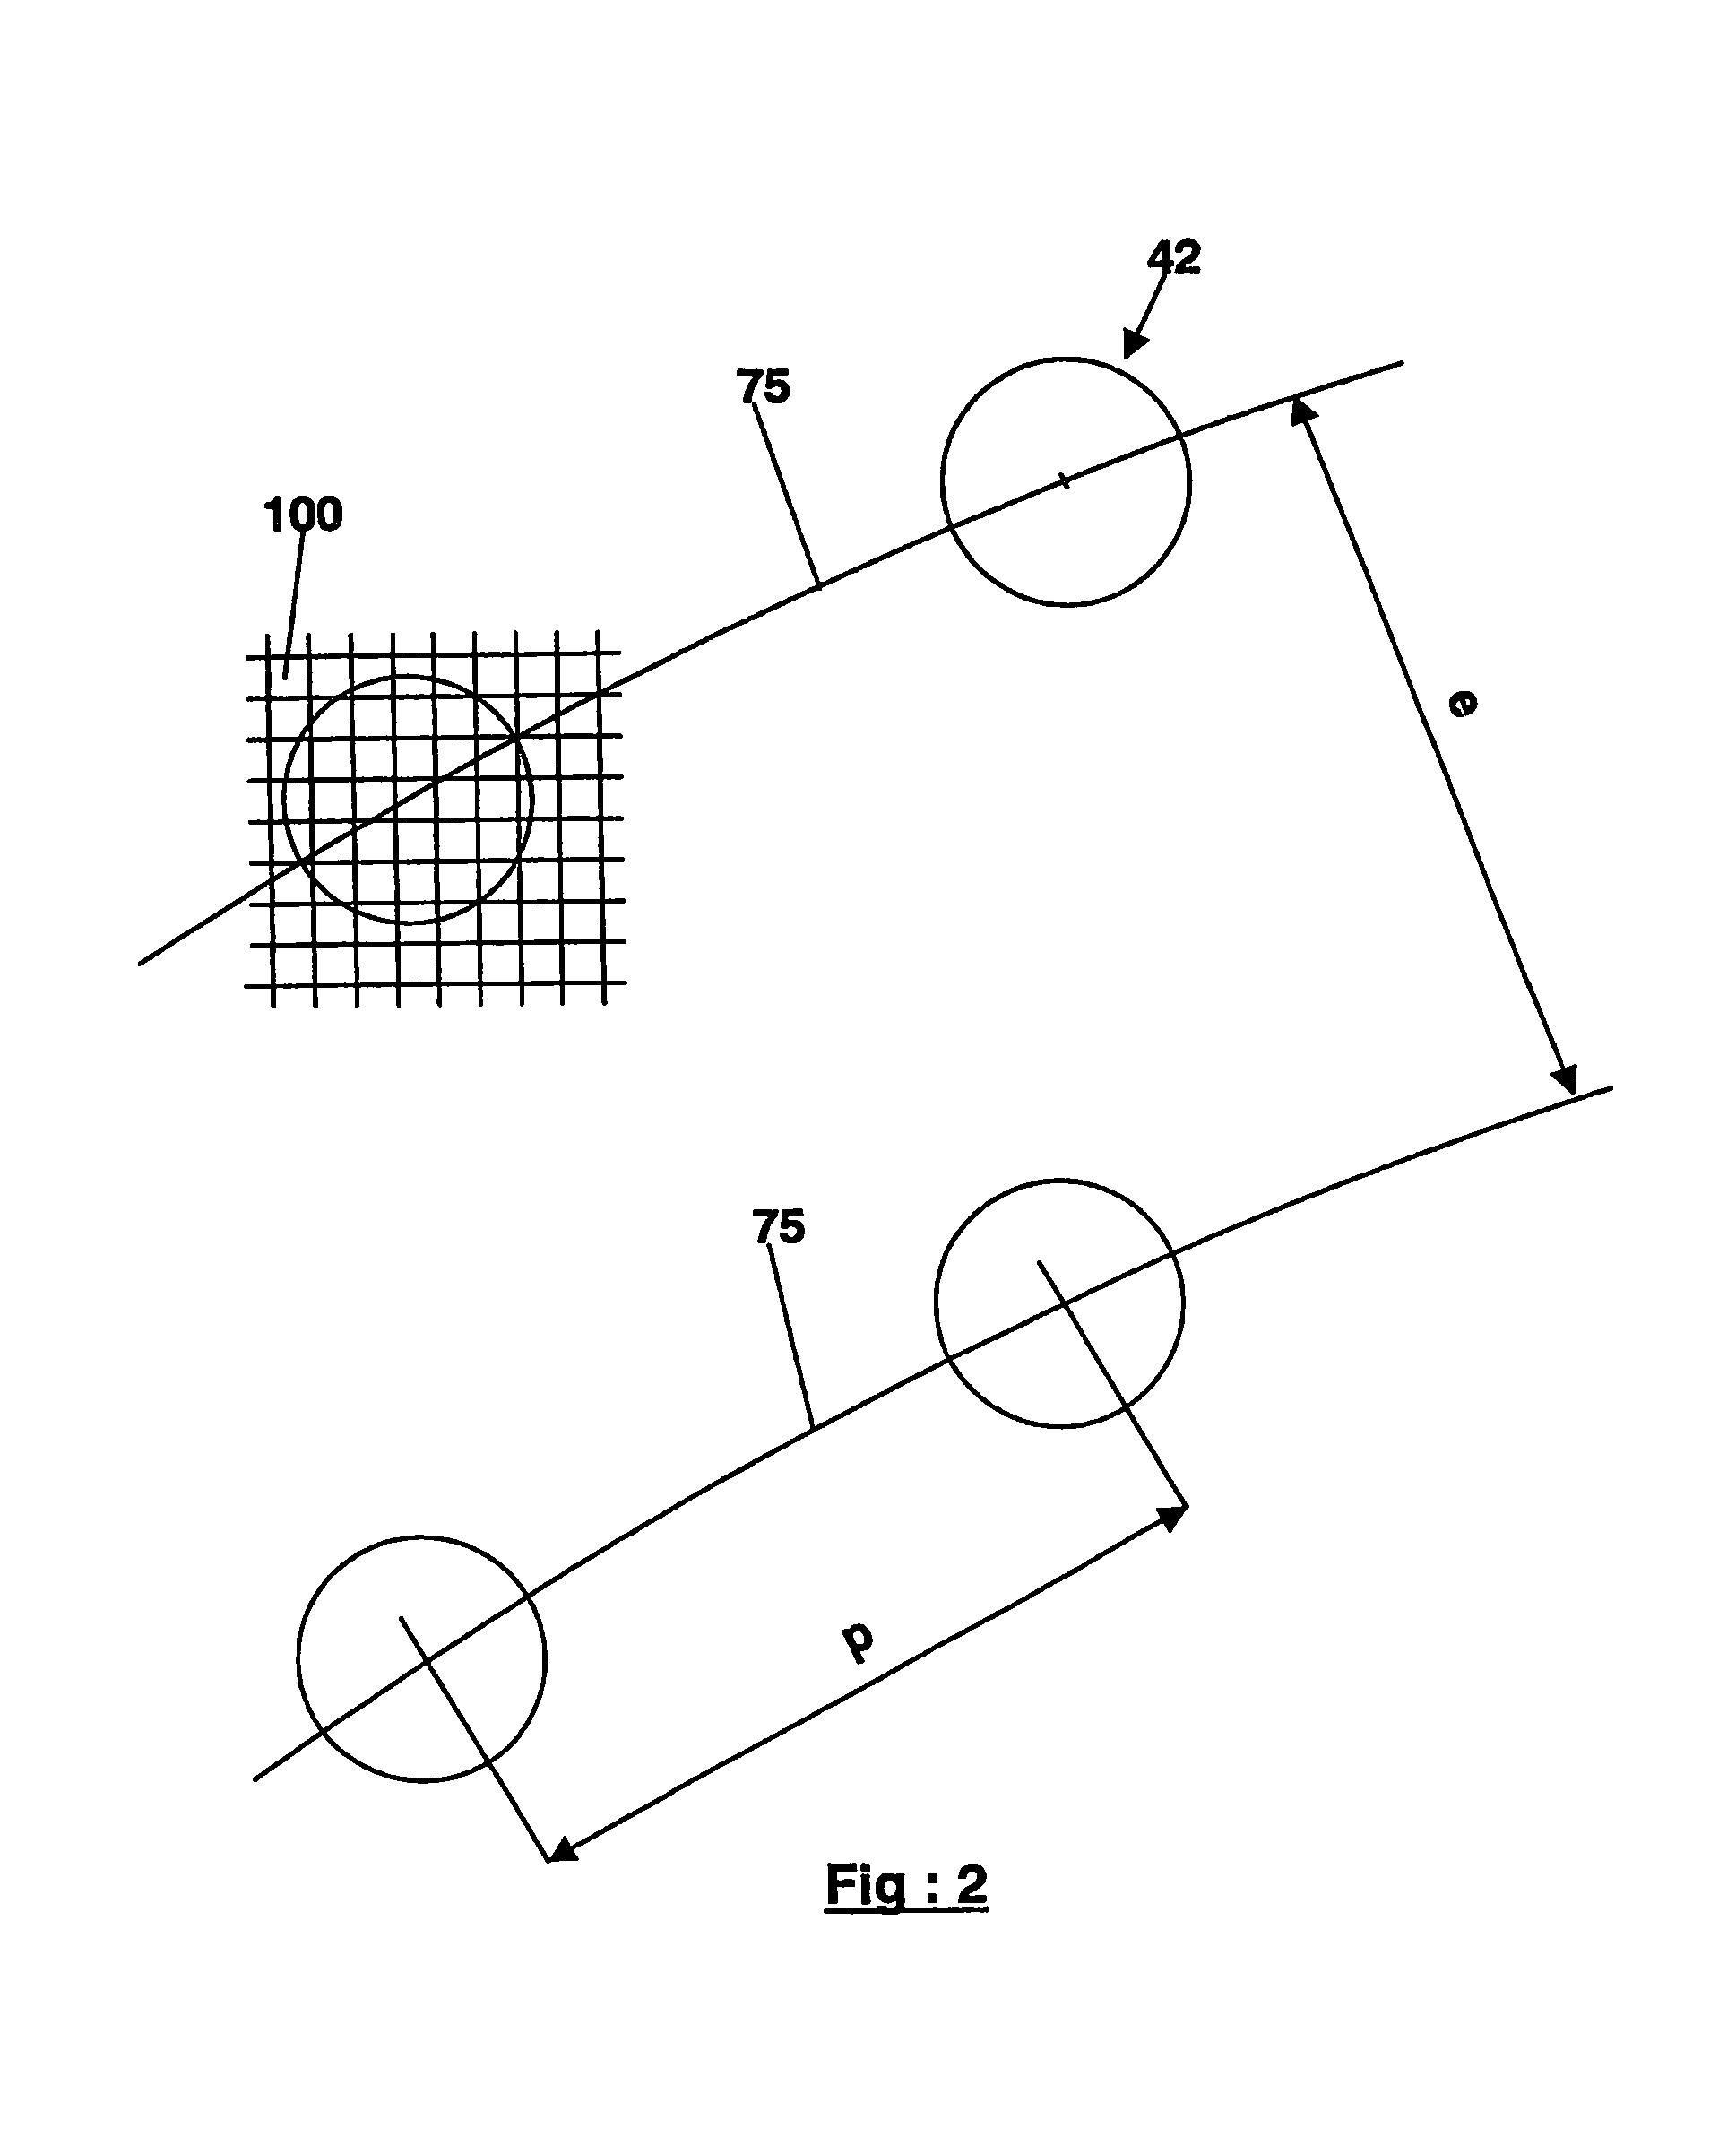 Method of assembling and monitoring an acoustic panel comprising a double resonator with a honeycomb core